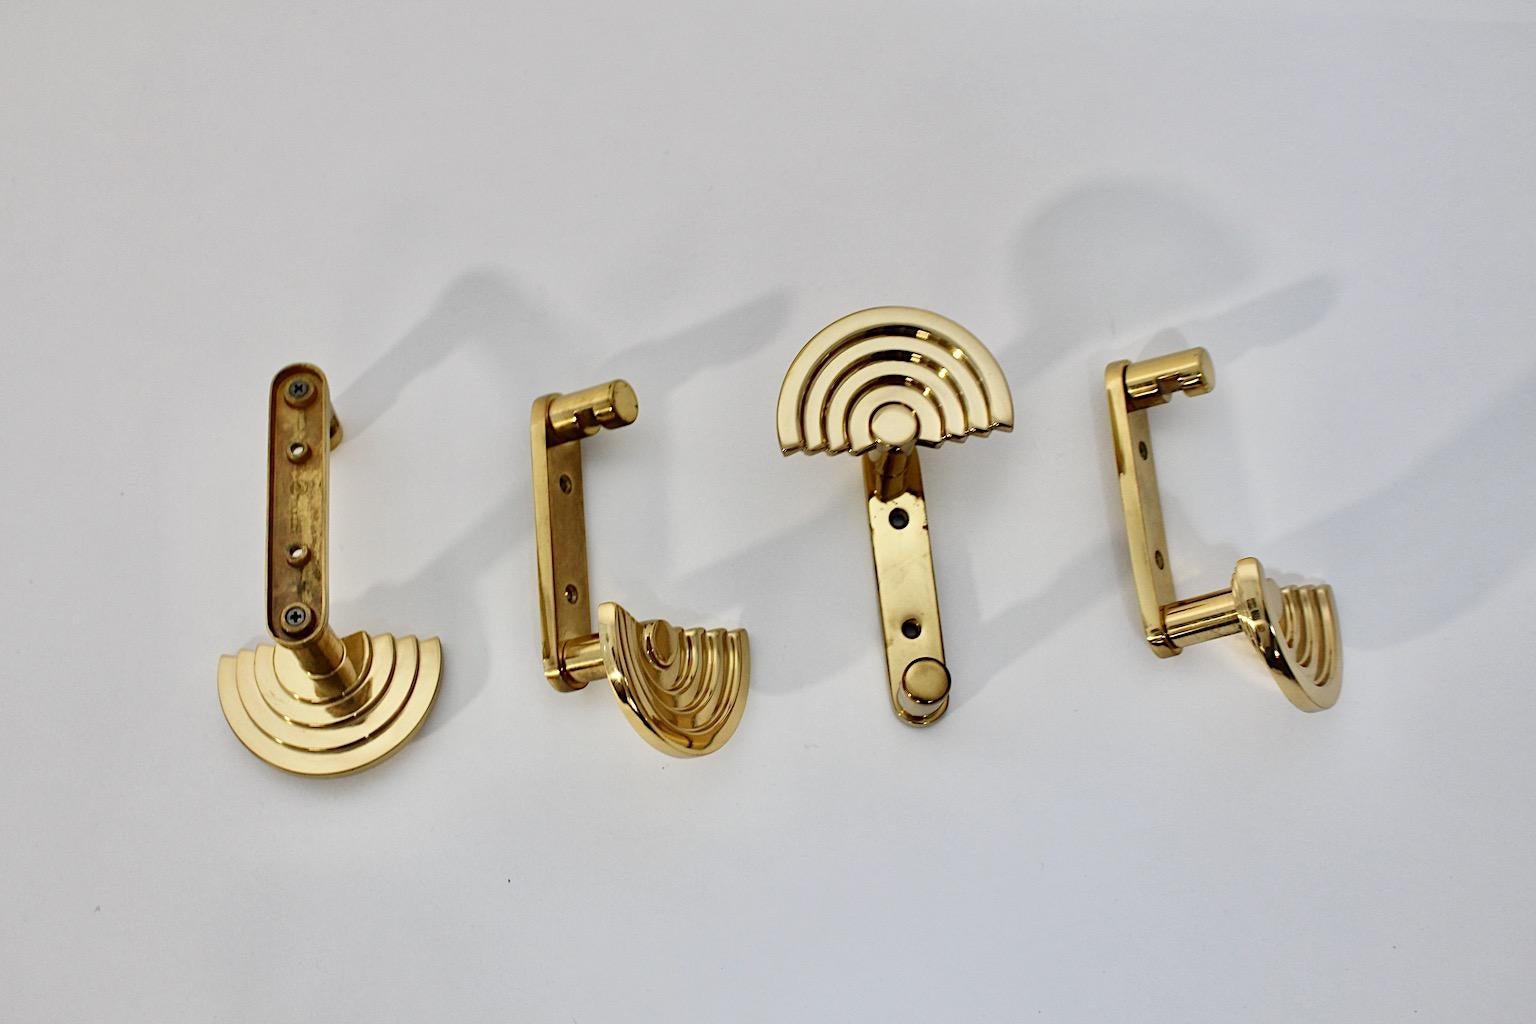 Ettore Sottsass Vintage Brass Four Wall Hooks or Coat Hooks circa 1985 Italy For Sale 2